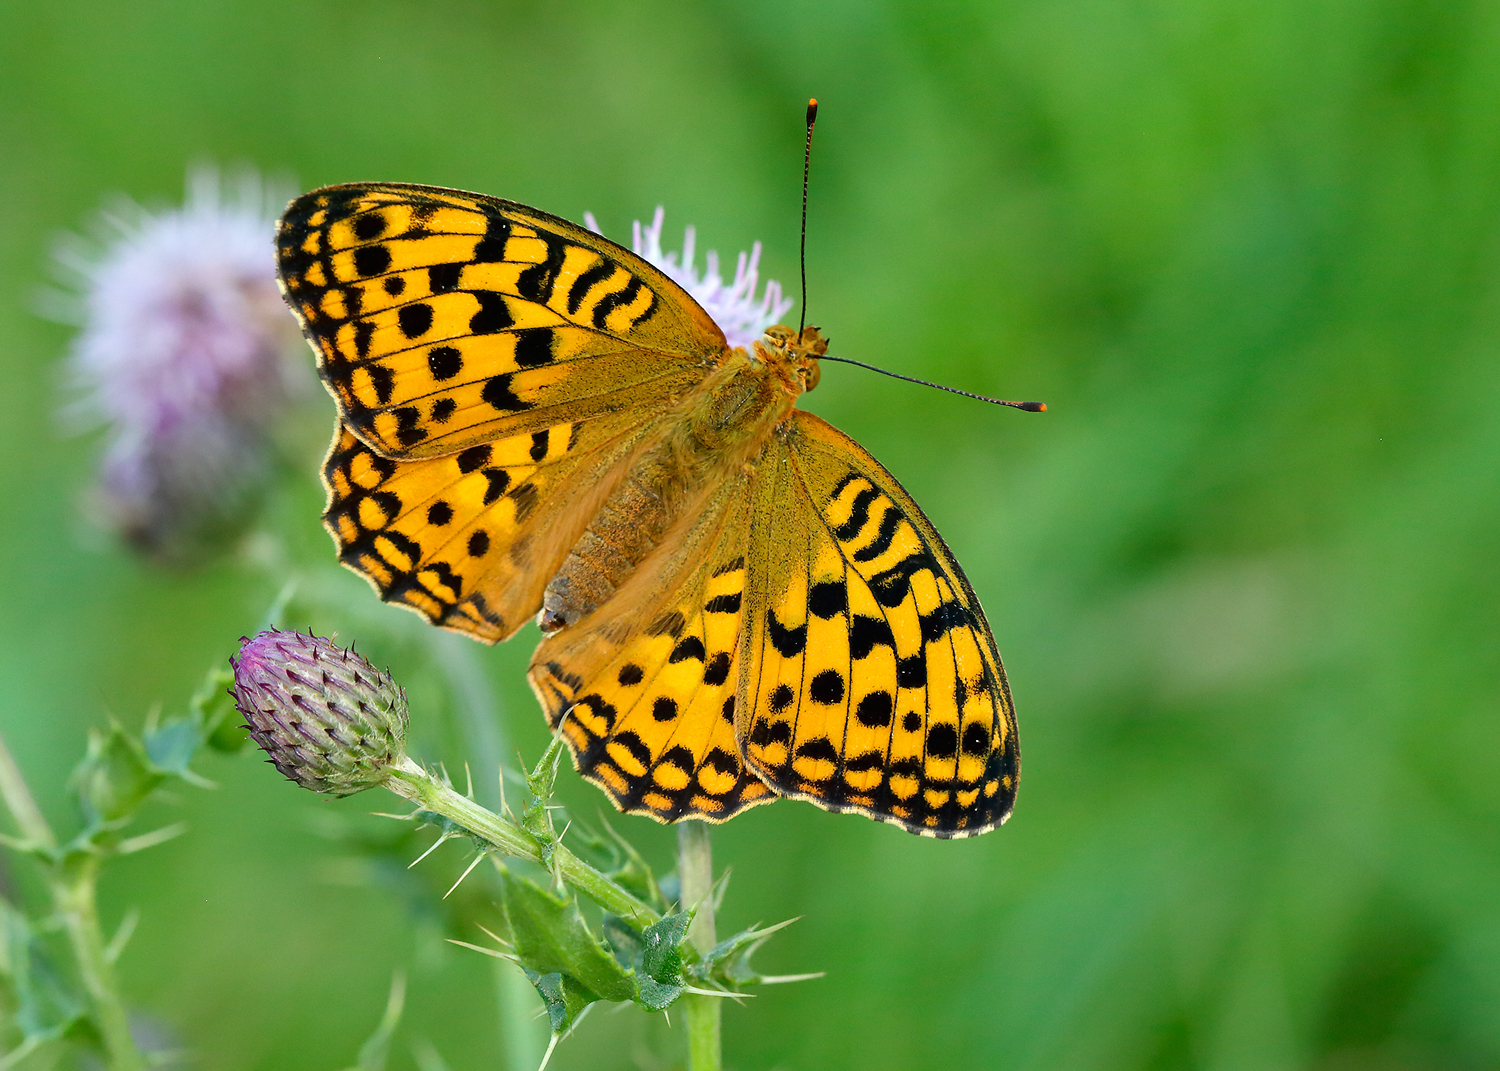 A high brown fritillary butterfly, with orange and black chequered wings, rests on a thistle